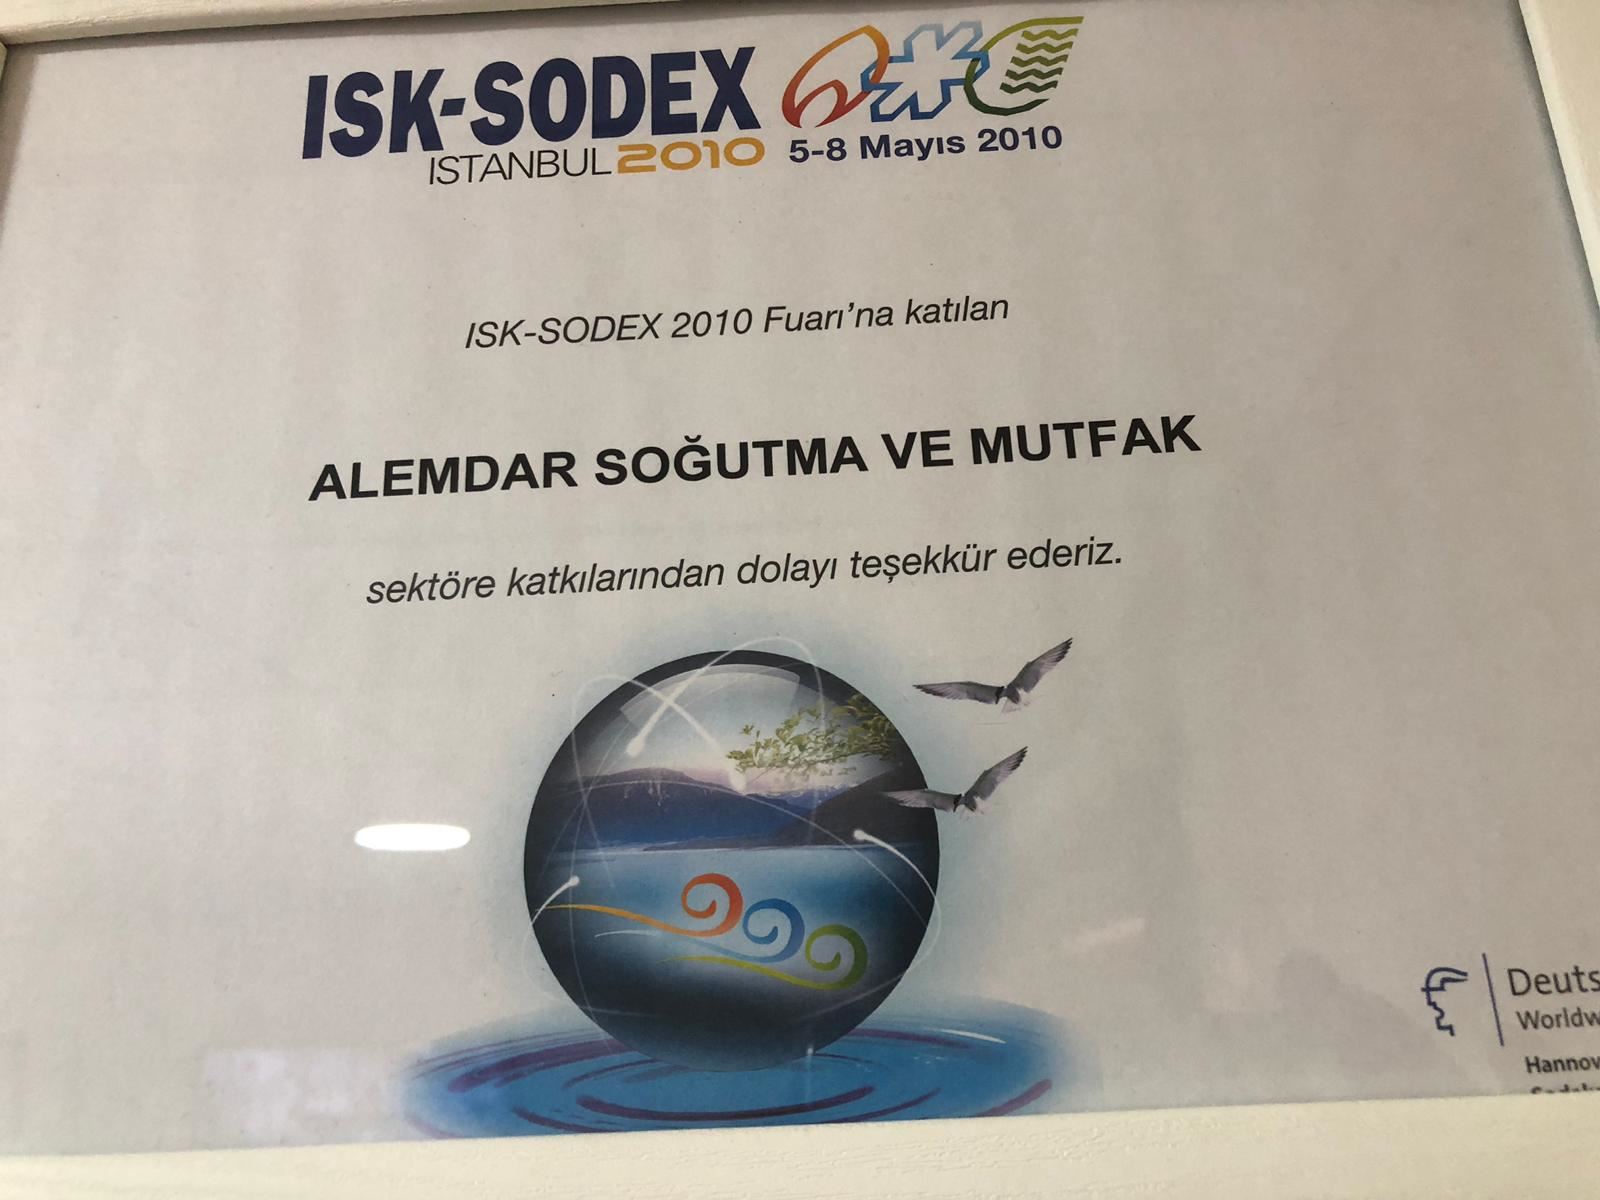 ISK-SODEX İSTANBUL 2010